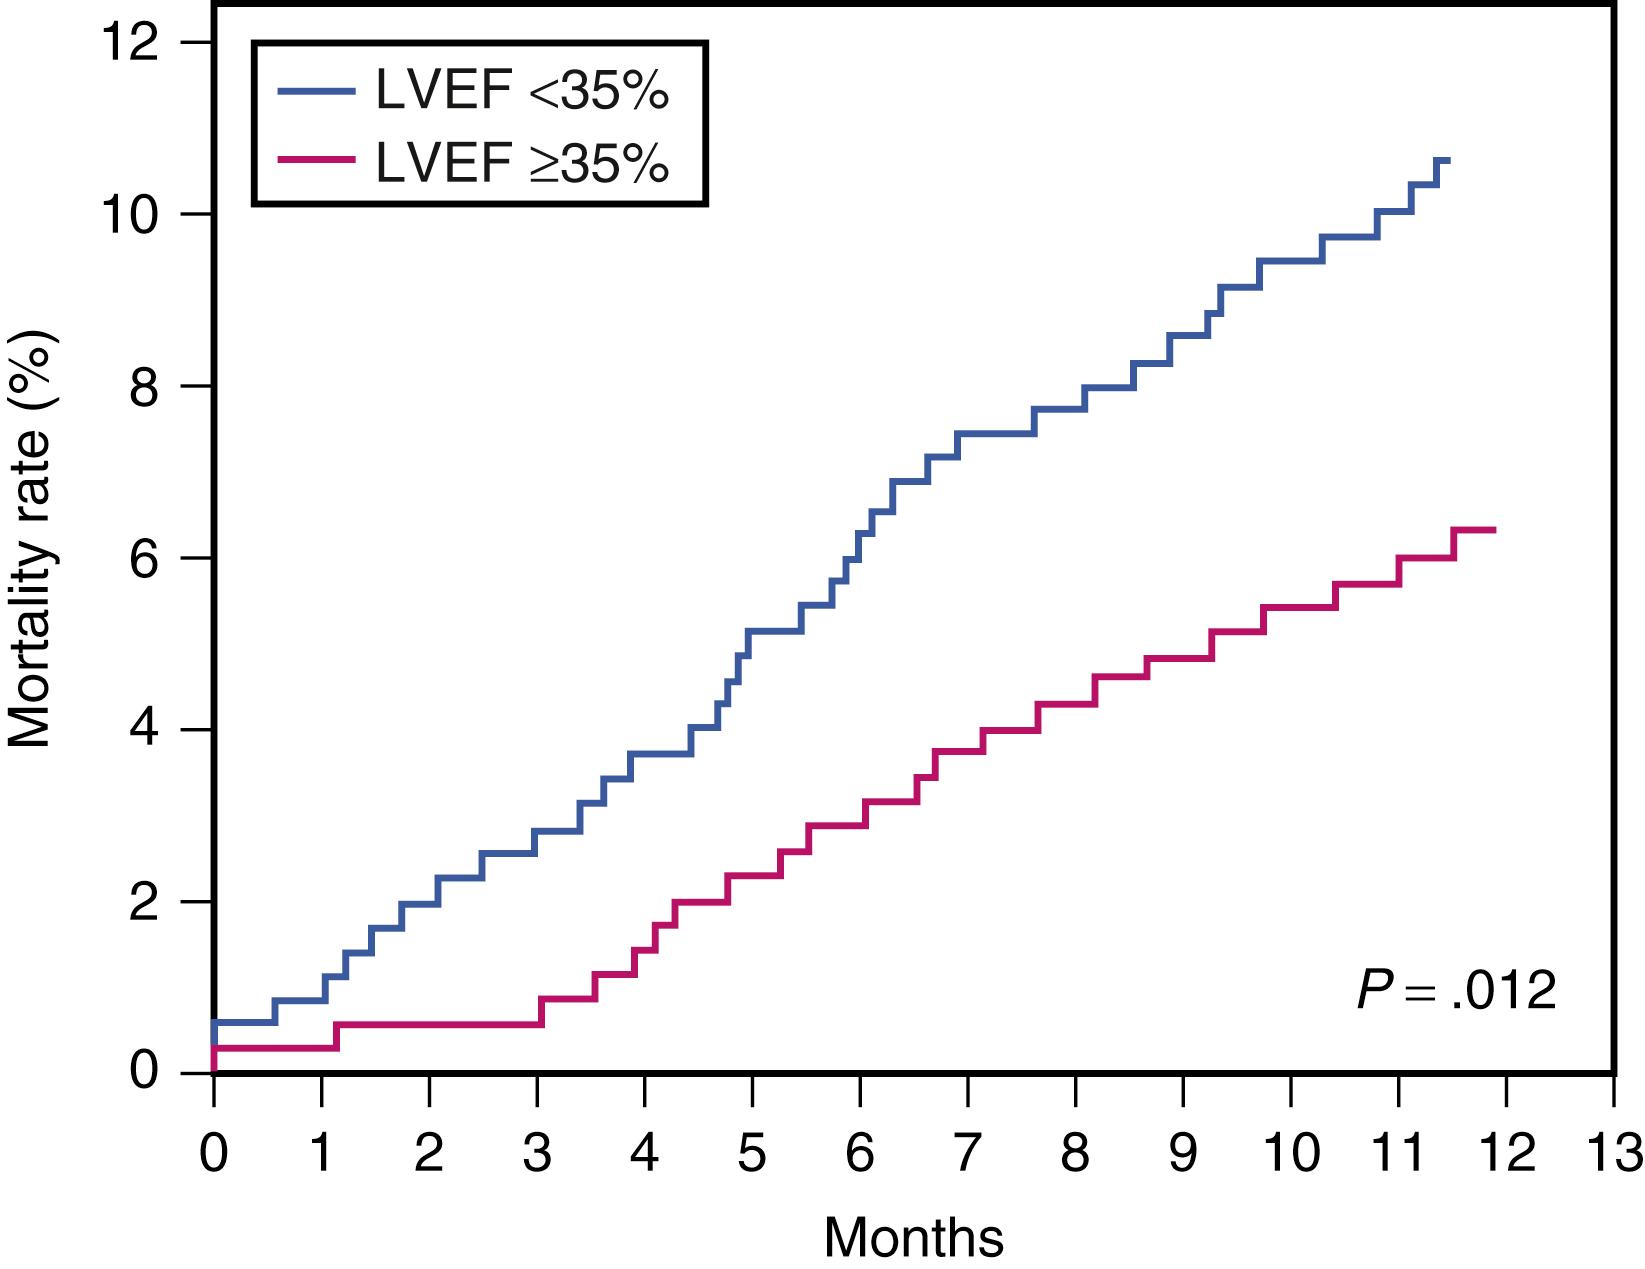 Figure 67.1, All-cause mortality according to left ventricular ejection fraction (LVEF) in the Studies of Left Ventricular Dysfunction (SOLVD) trial. (Reproduced with permission from Quinones MA, et al: Echocardiographic predictors of clinical outcome in patients with left ventricular dysfunction enrolled in the SOLVD registry and trials: significance of left ventricular hypertrophy, J Am Coll Cardiol . 35:1237–1244, 2000.)